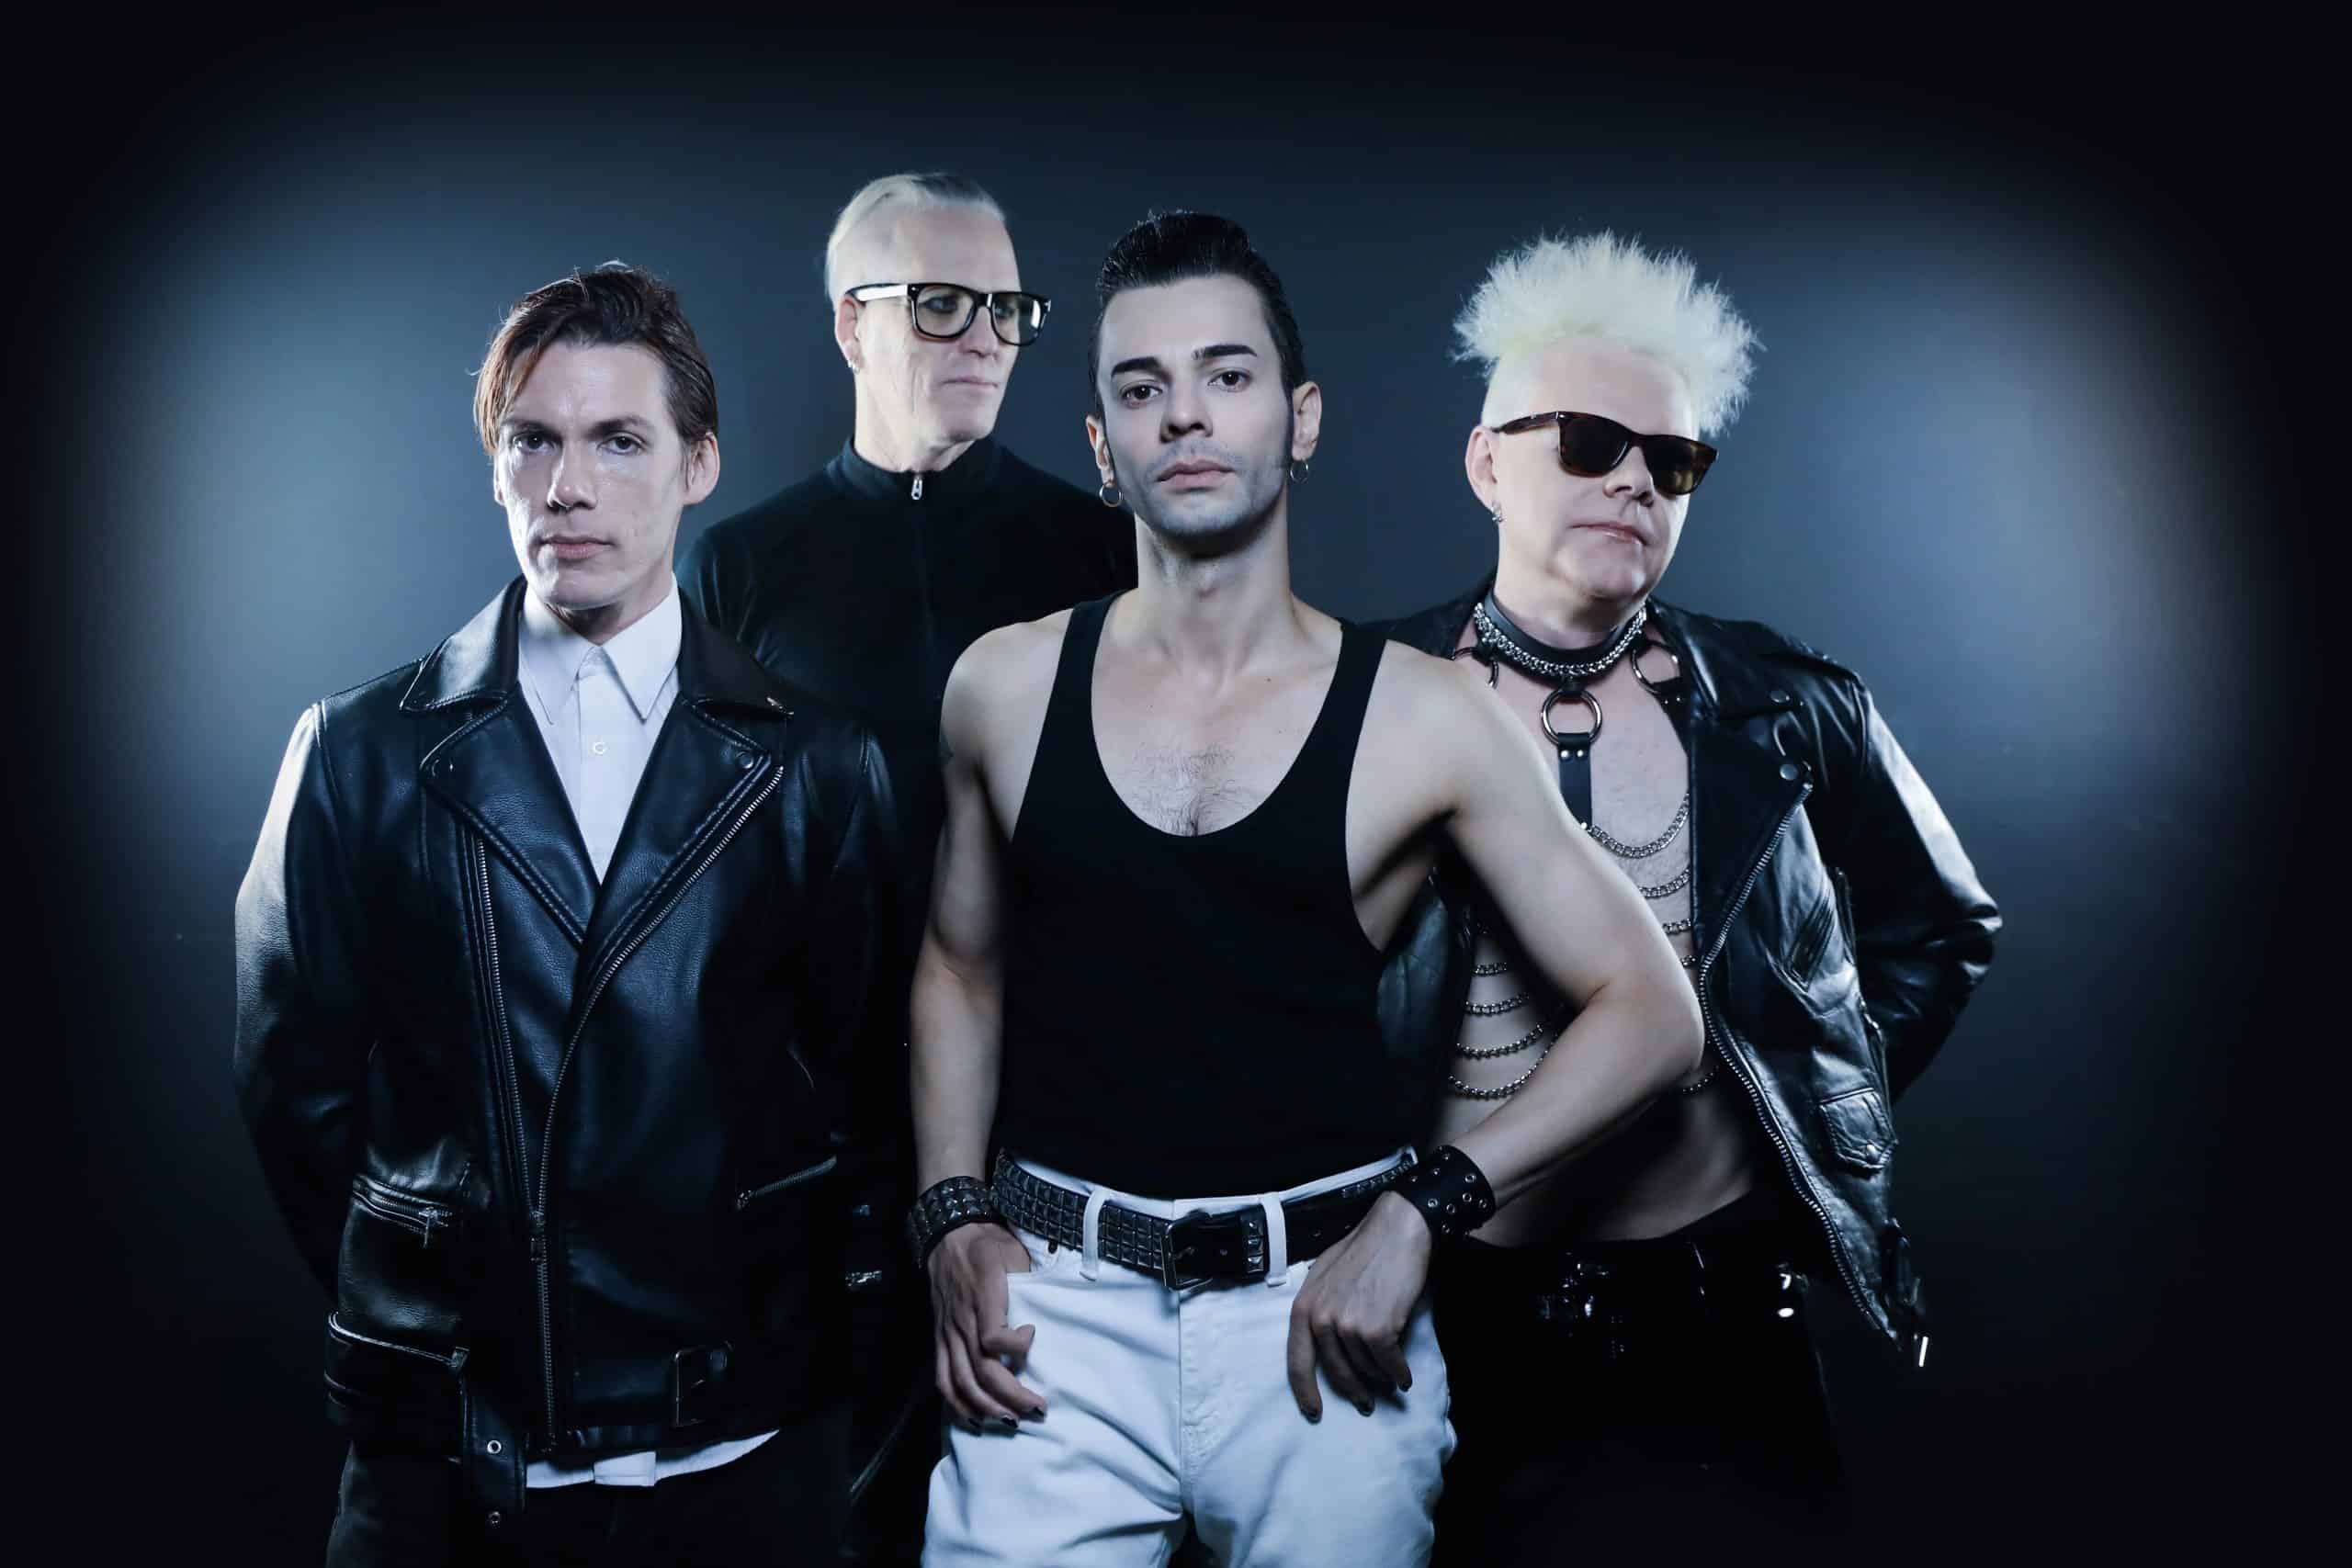 English synthpop band Depeche Mode, 1990. From left to right, they